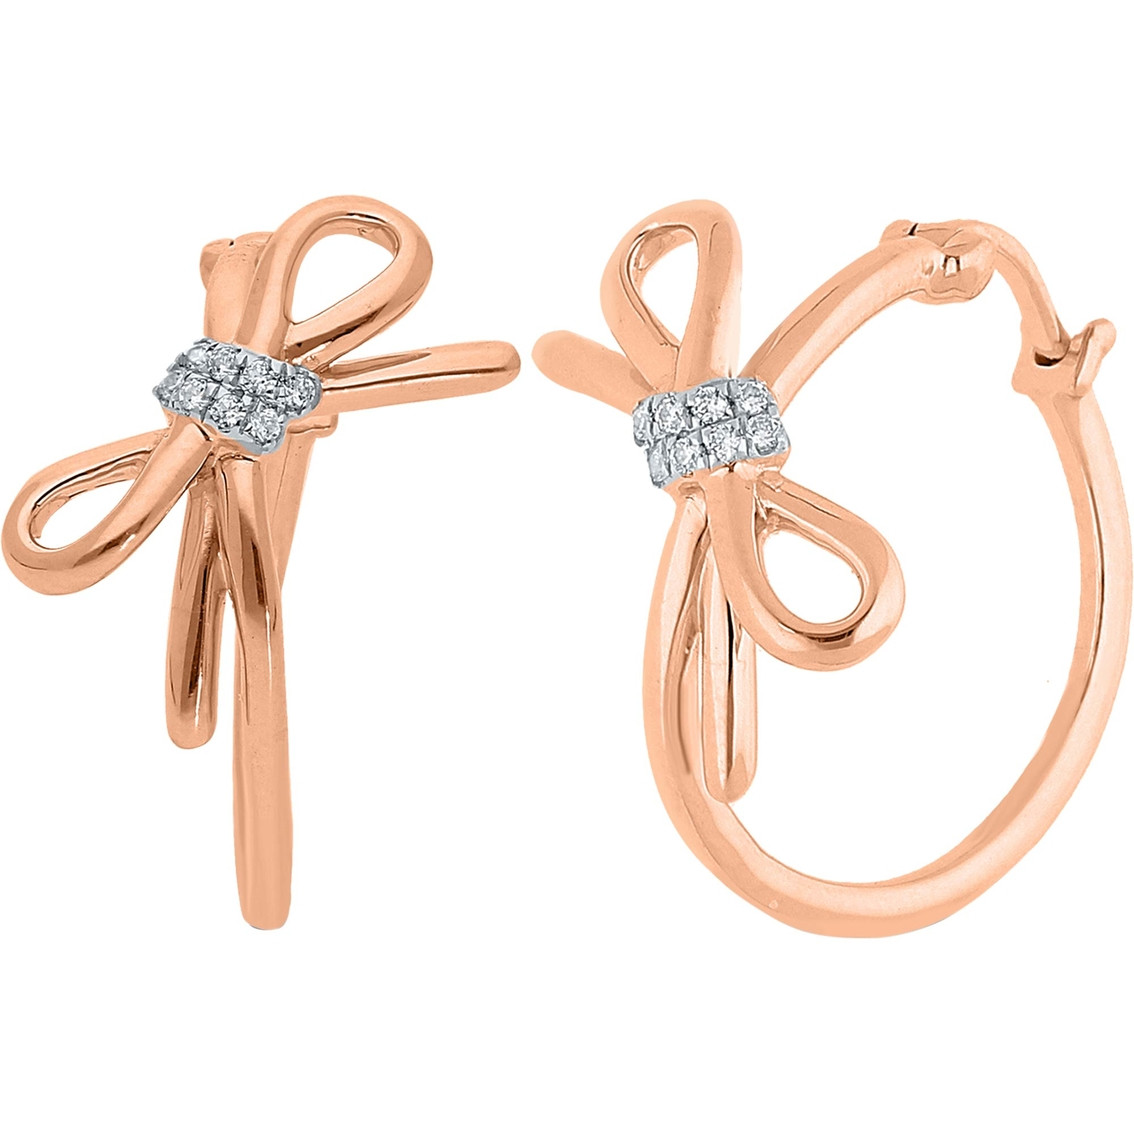 Gold Bow Earrings
 14k Rose Gold Plated Sterling Silver Diamond Accent Bow